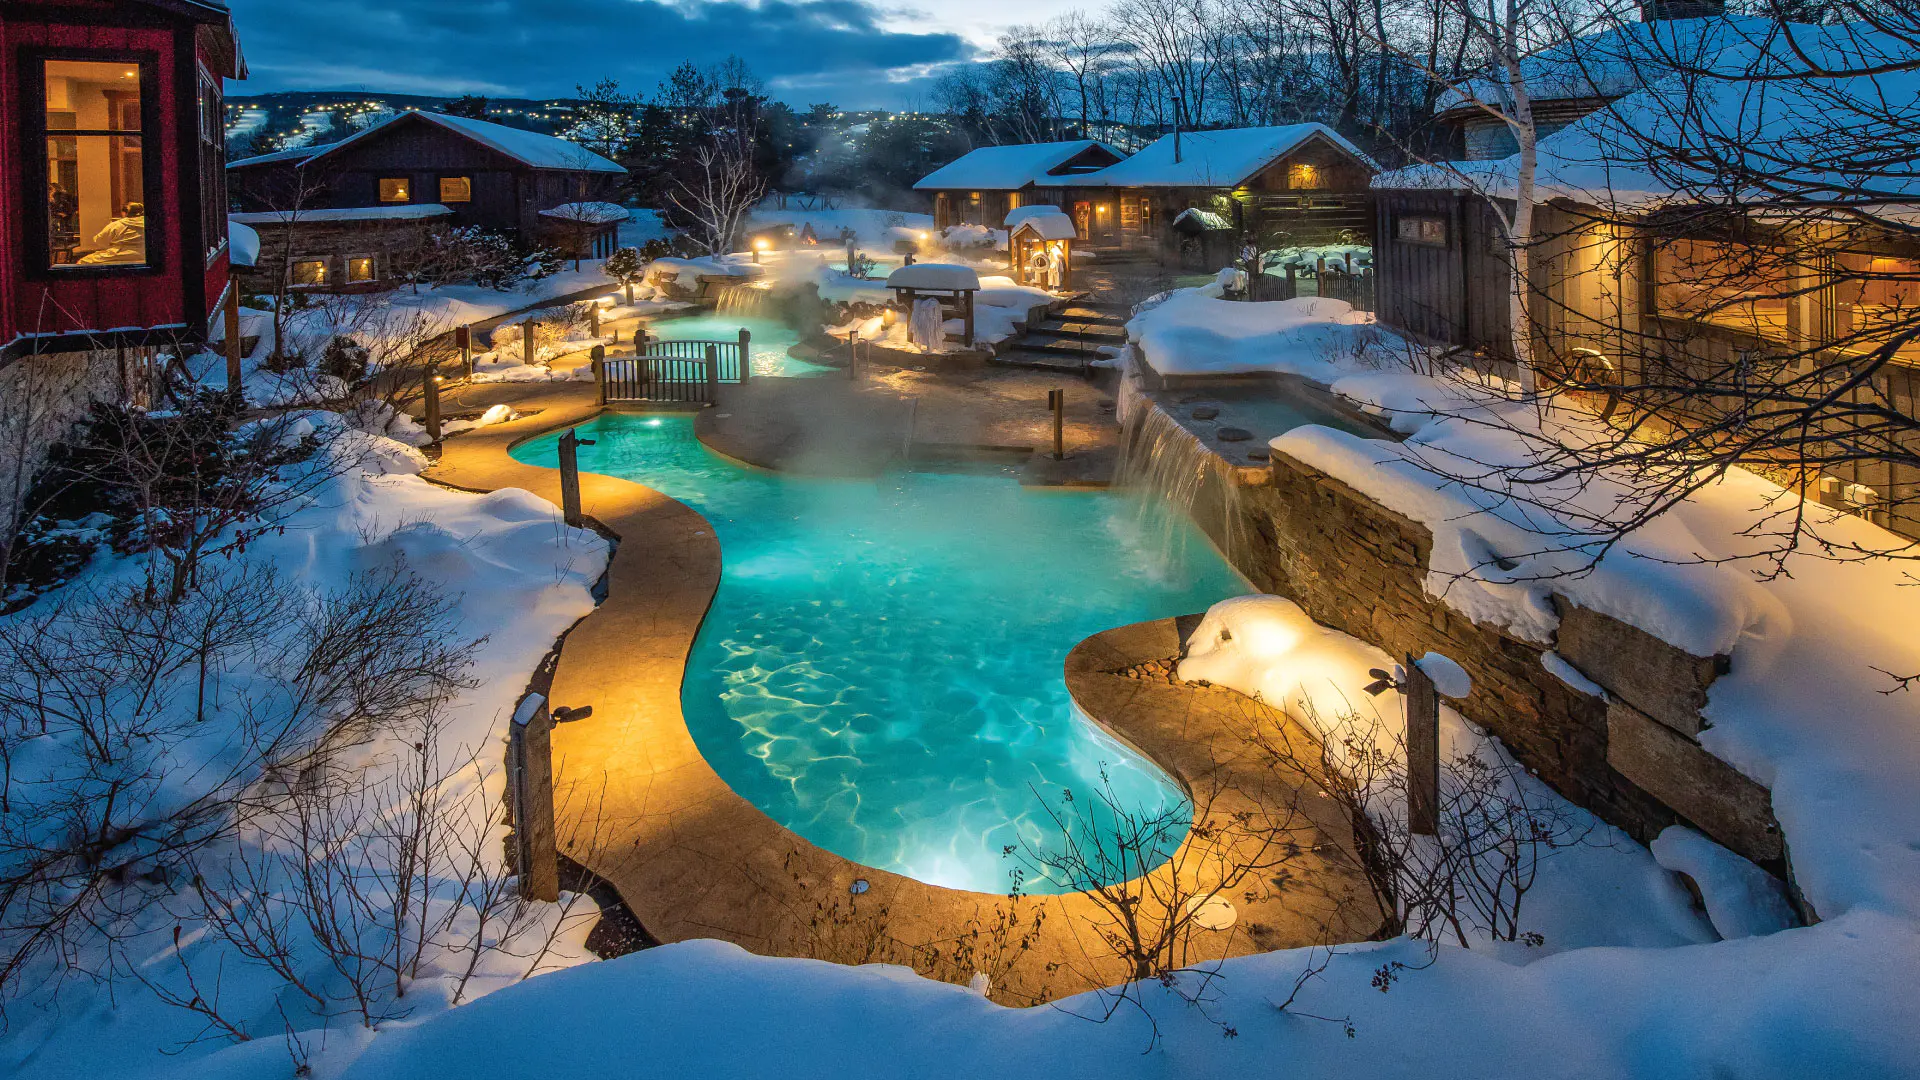 Overhead view of Scandinave Spa's baths in the Winter